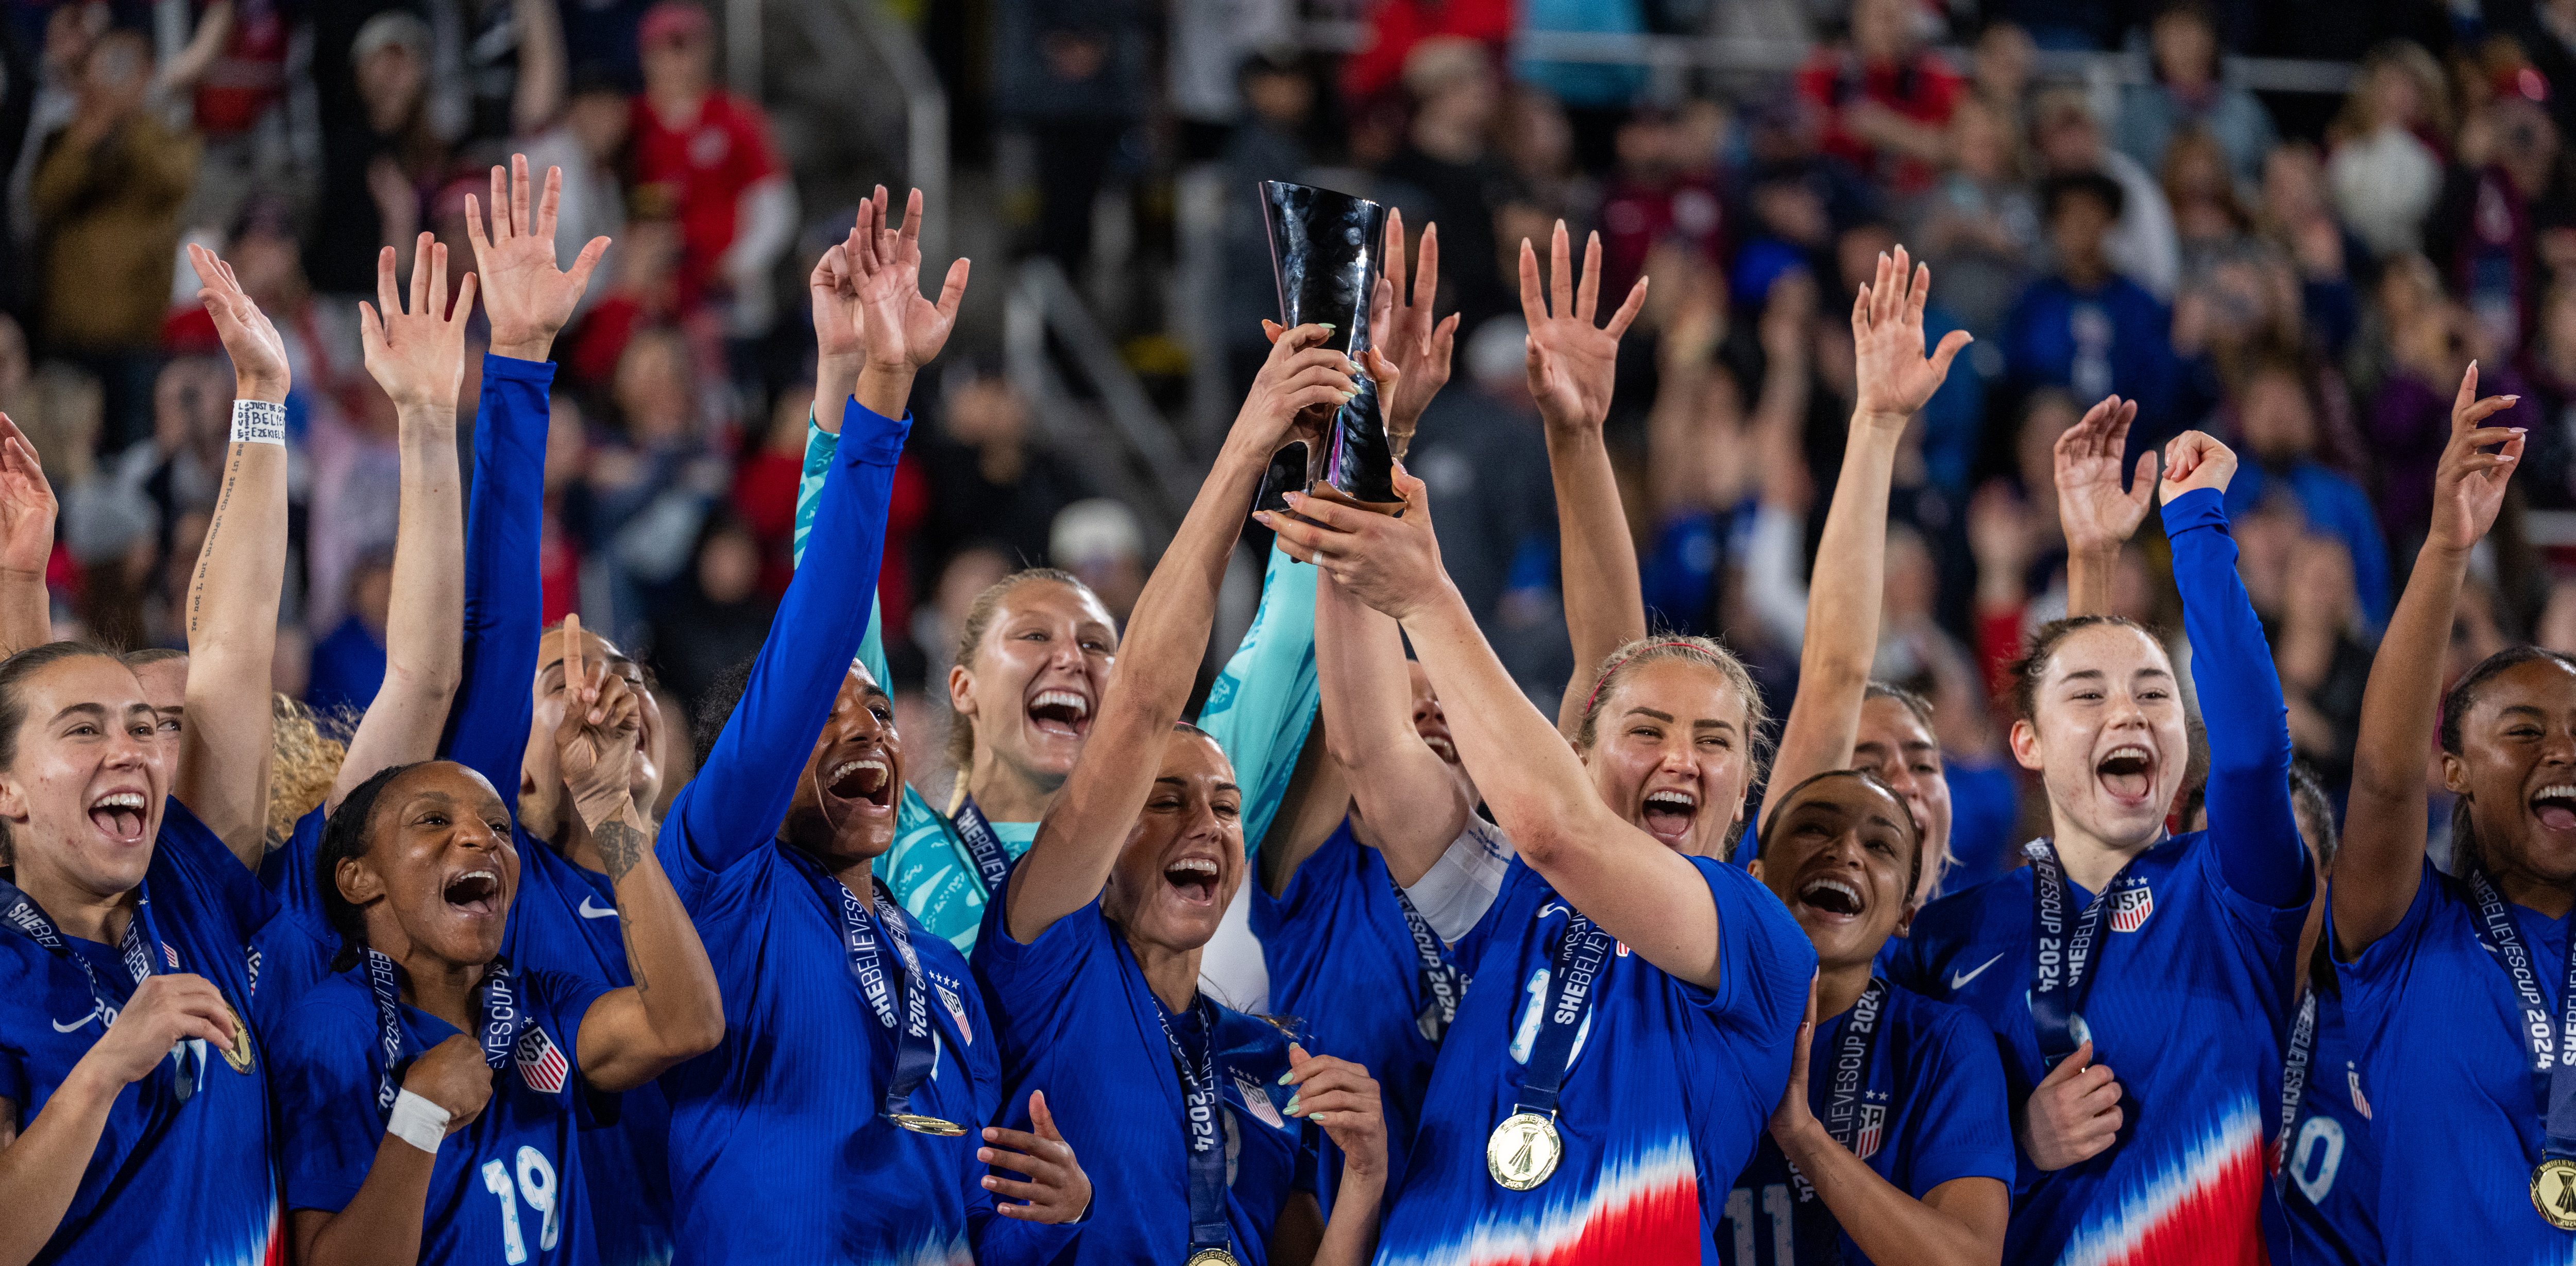 USWNT to play 2024 Olympics send-off match in Washington in July